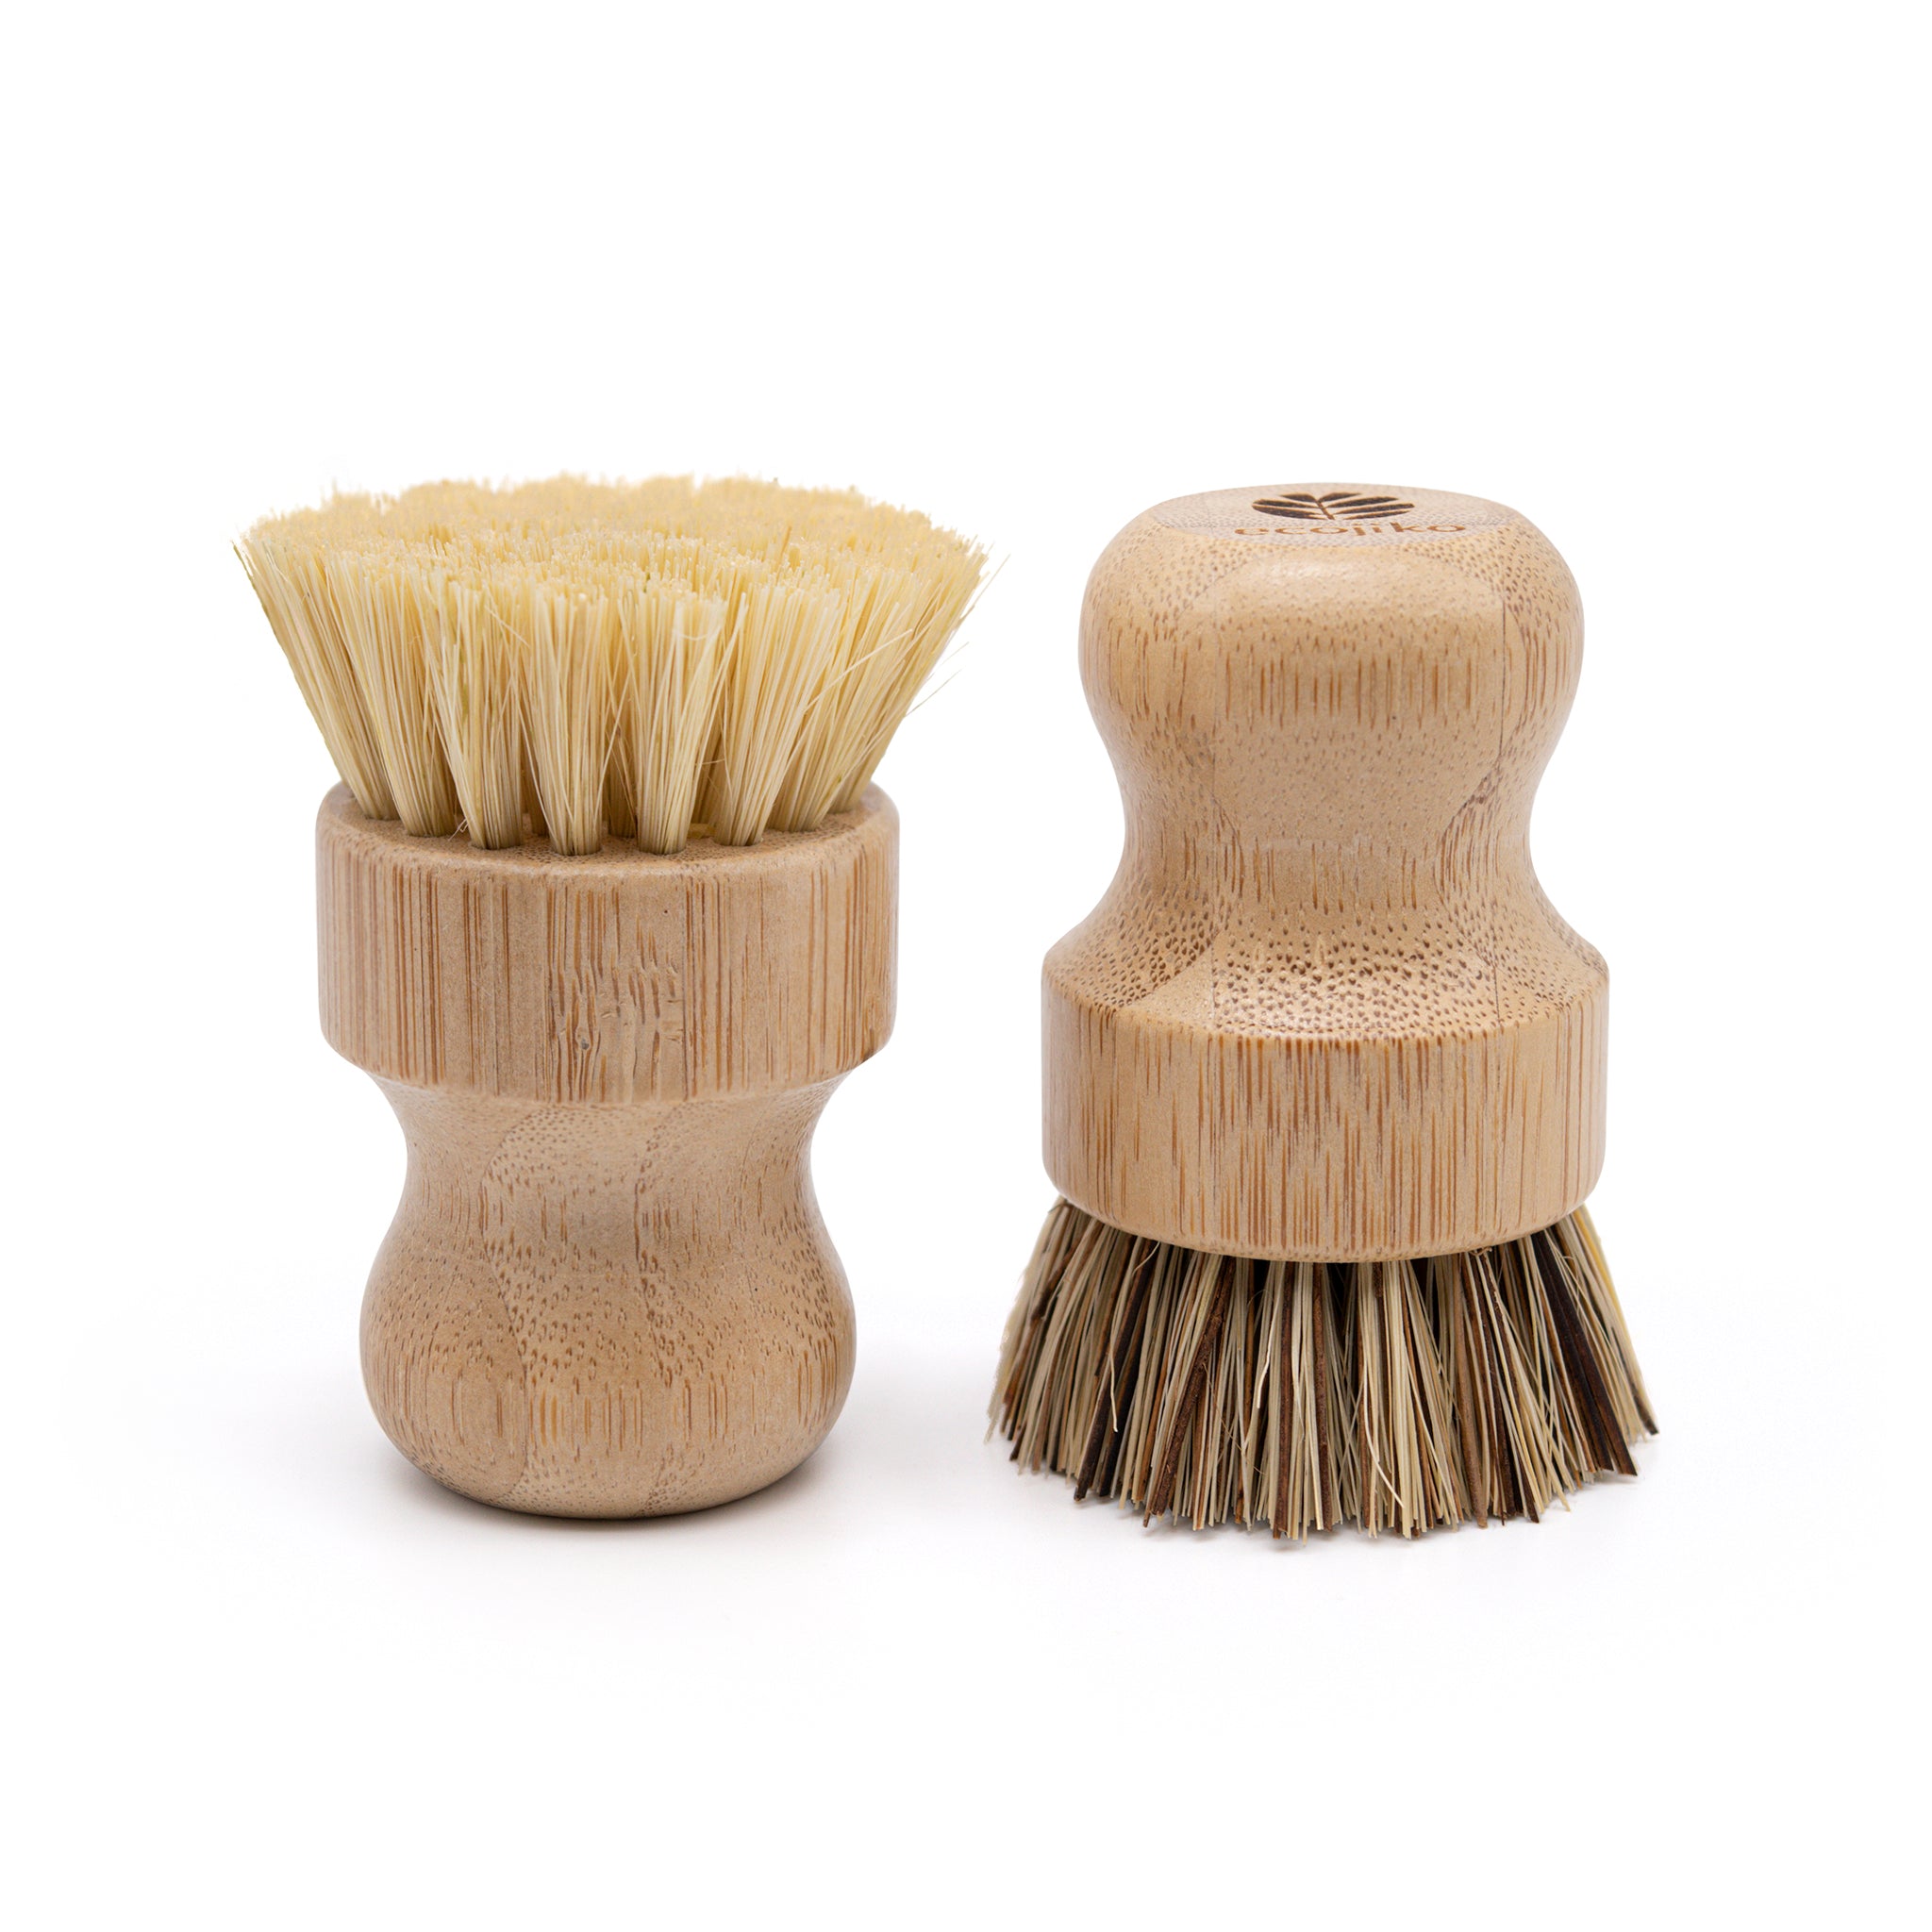 Close up of two bamboo scrubbers with sisal bristles